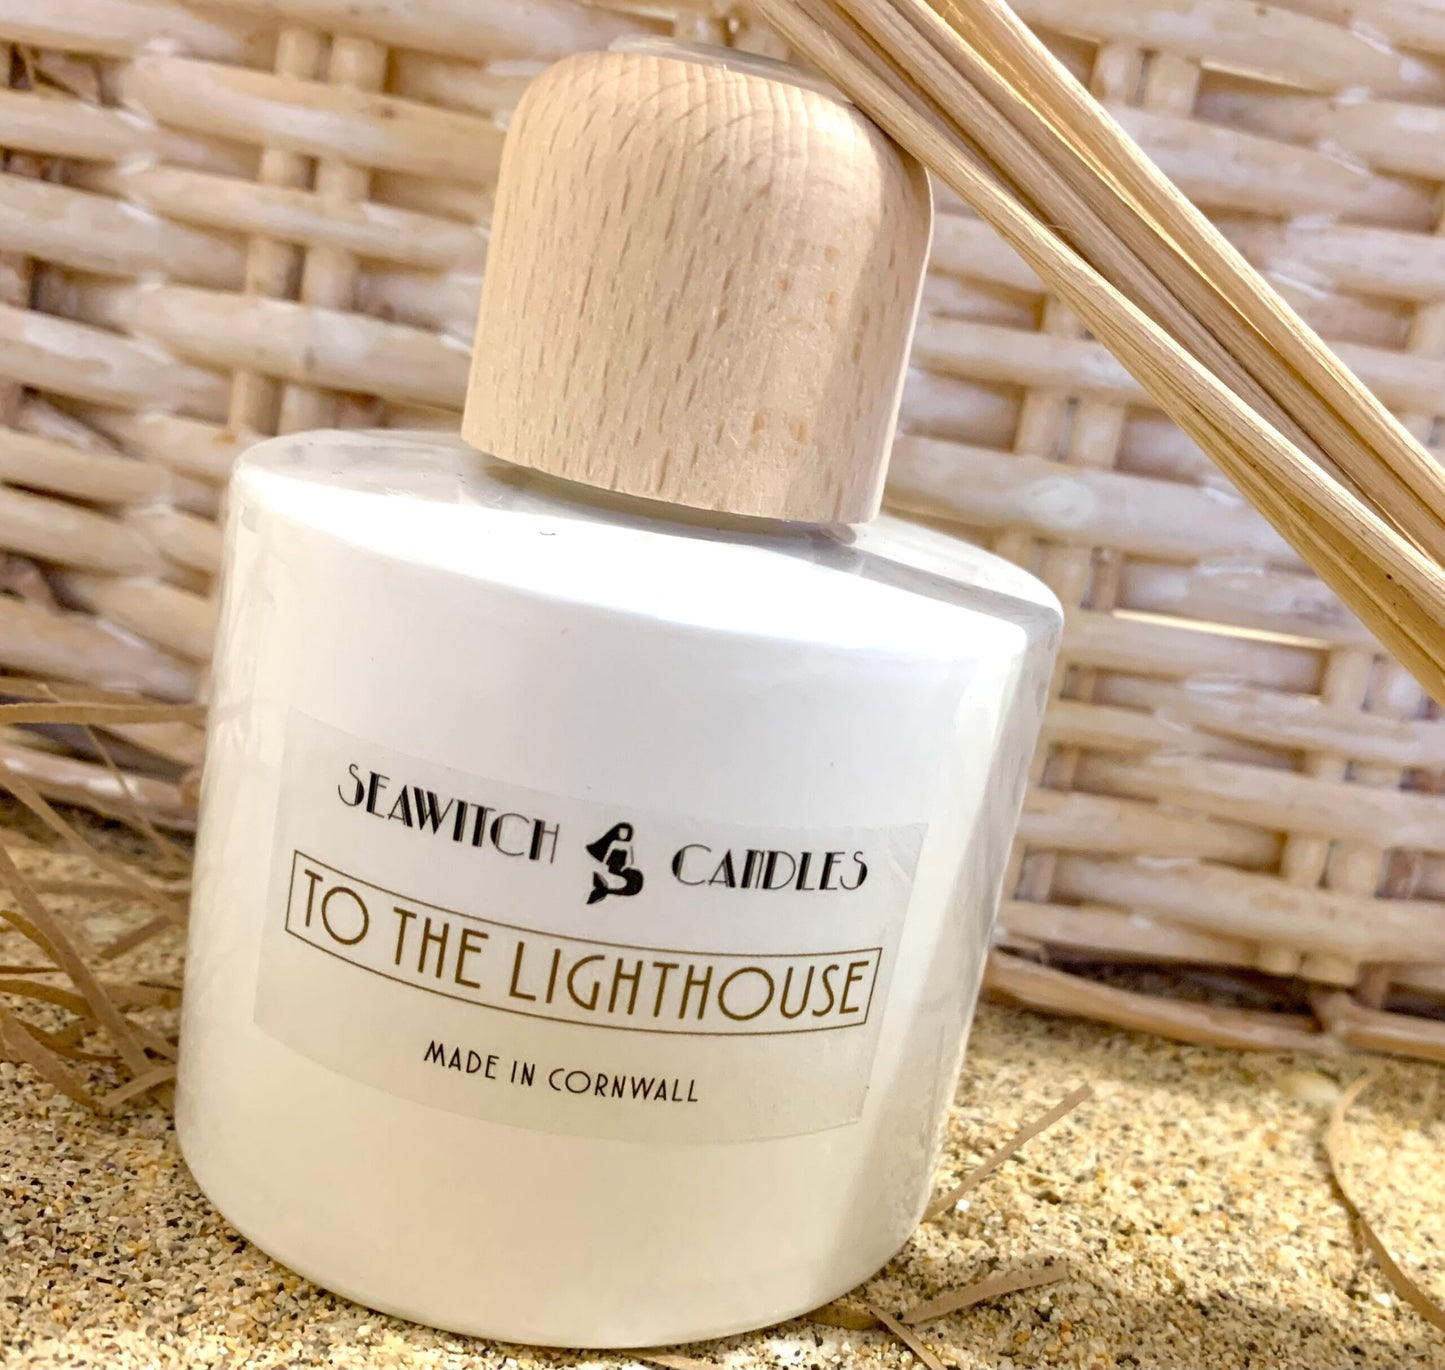 To The Lighthouse Scented Diffuser - handmade in Cornwall